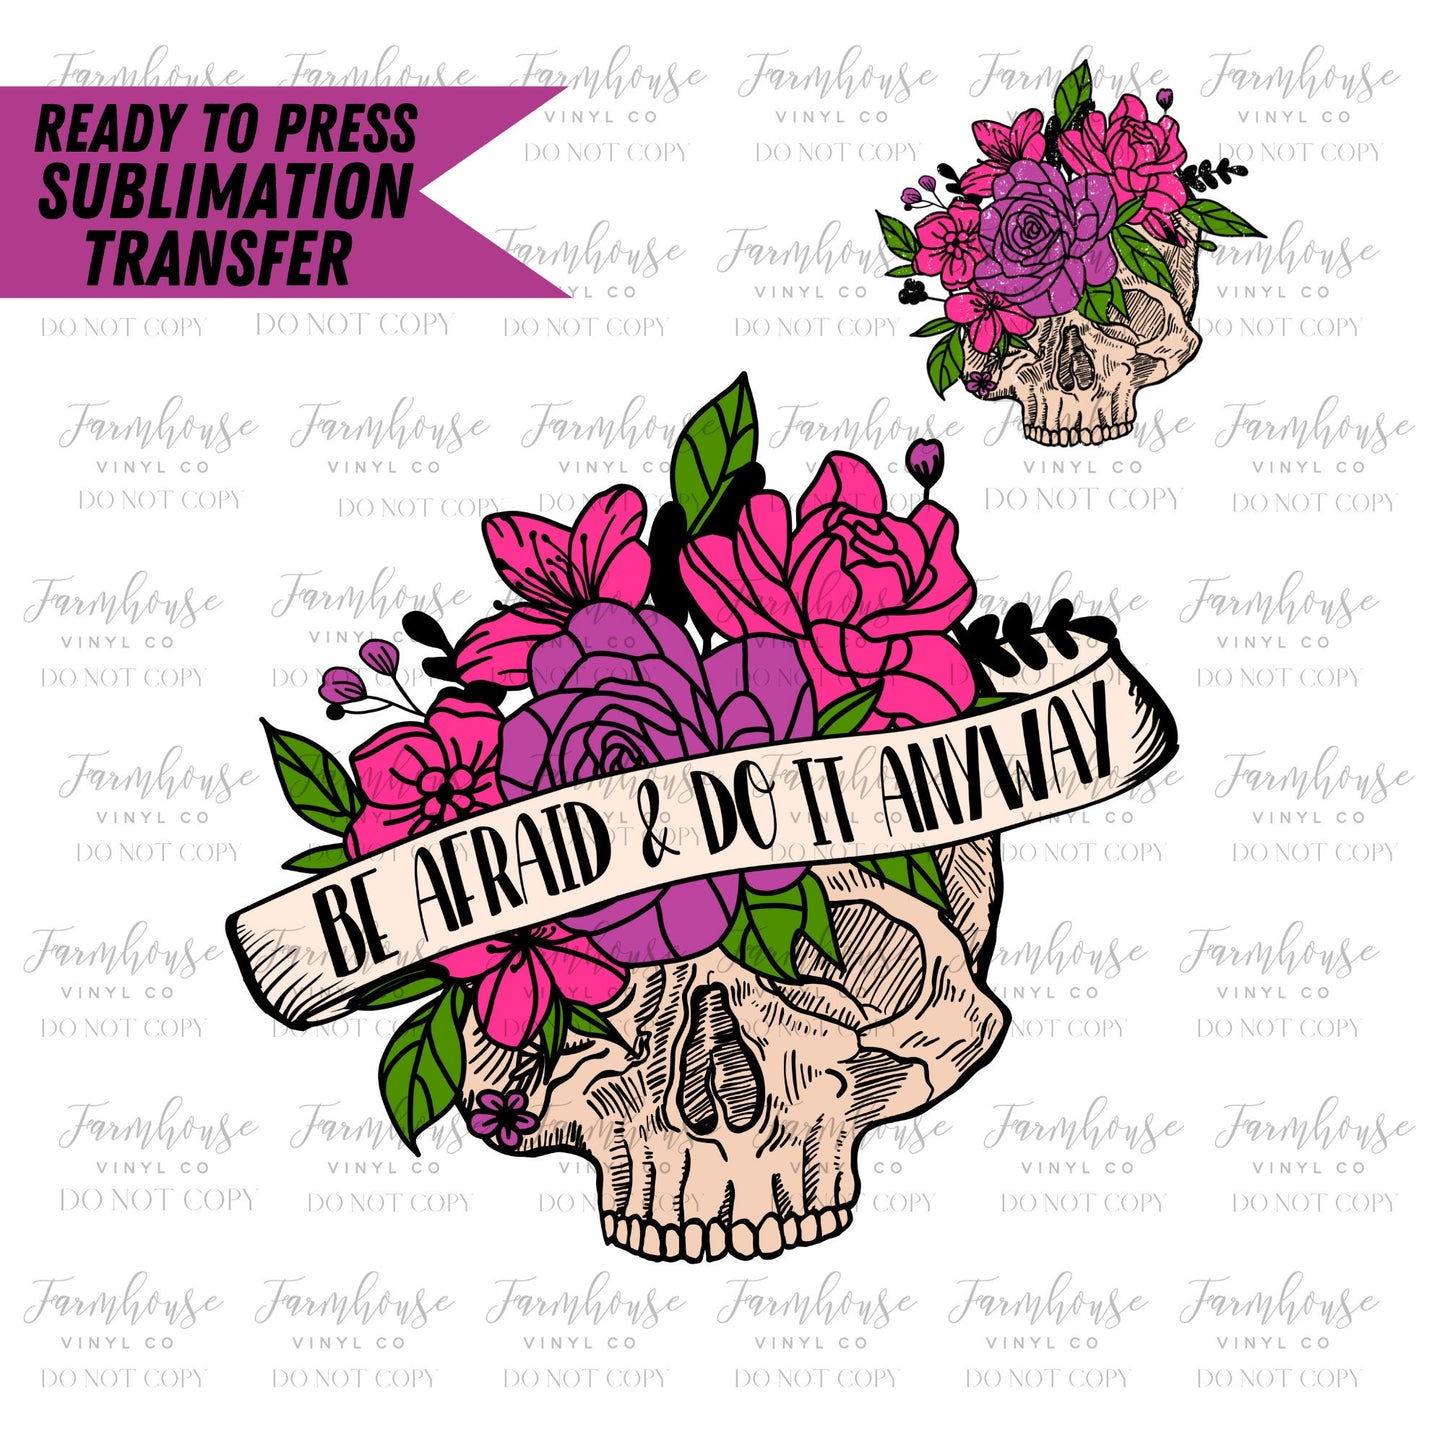 Be Scared & Do it Anyway, Ready To Press Sublimation Transfers, Floral Skull, Pocket Design, Sublimation Prints, Motivational Design Print